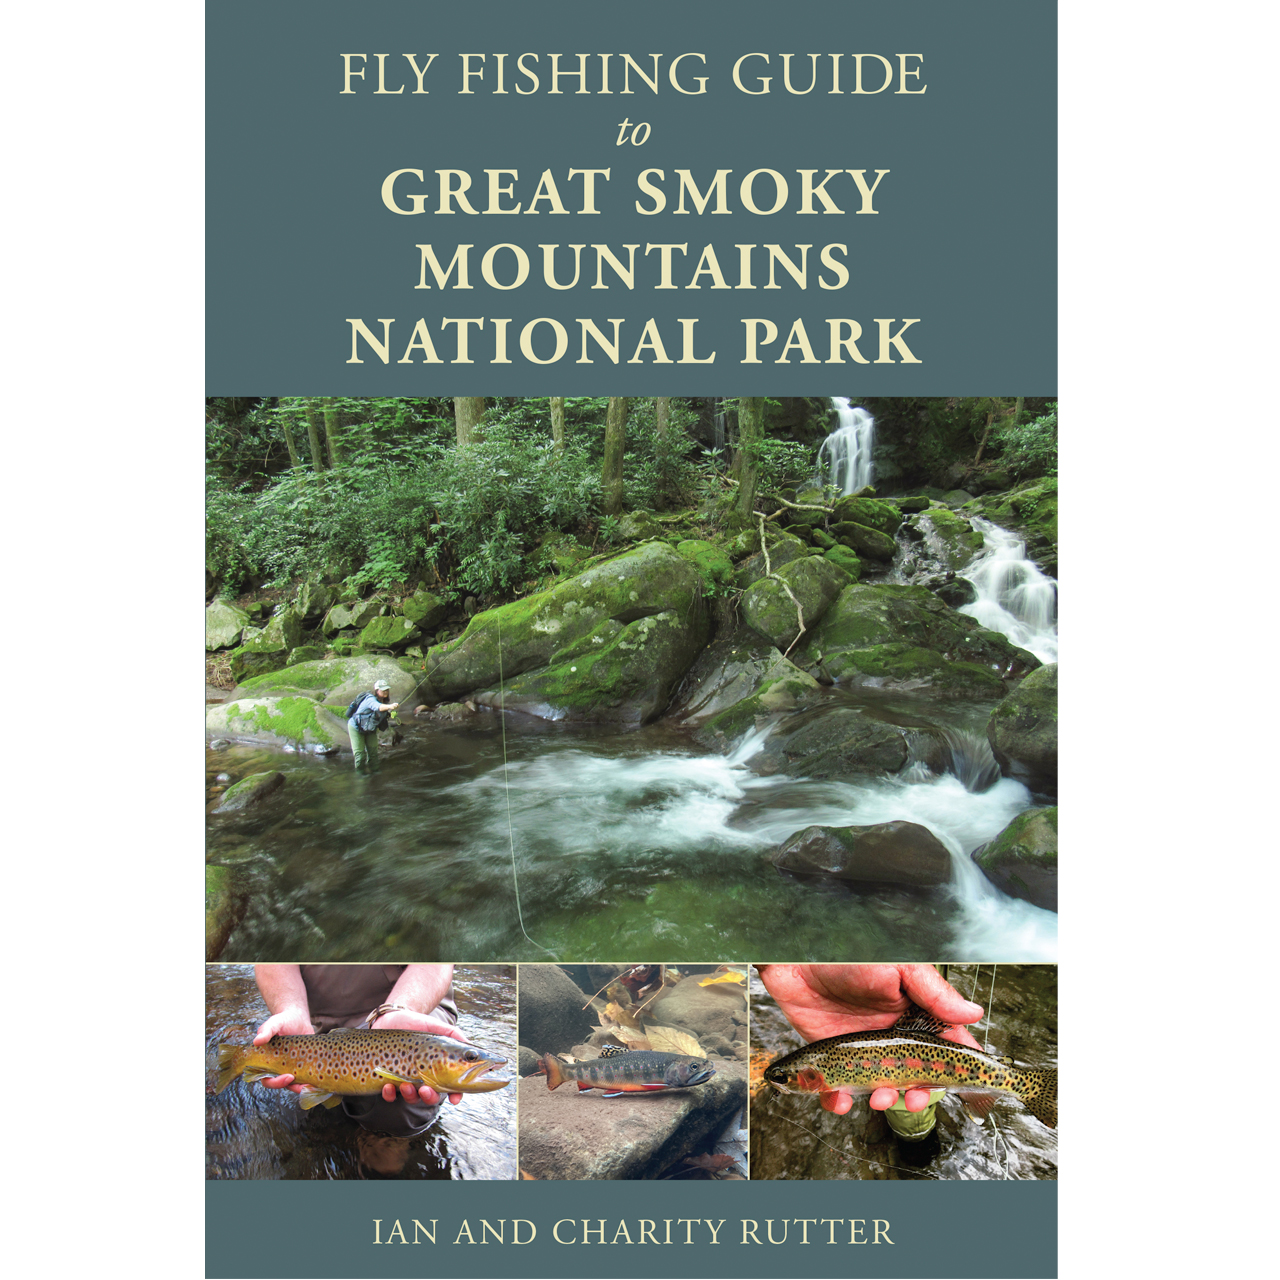 FLY FISHING GUIDE TO GREAT SMOKY MOUNTAINS NATIONAL PARK by IAN AND CHARITY  RUTTER